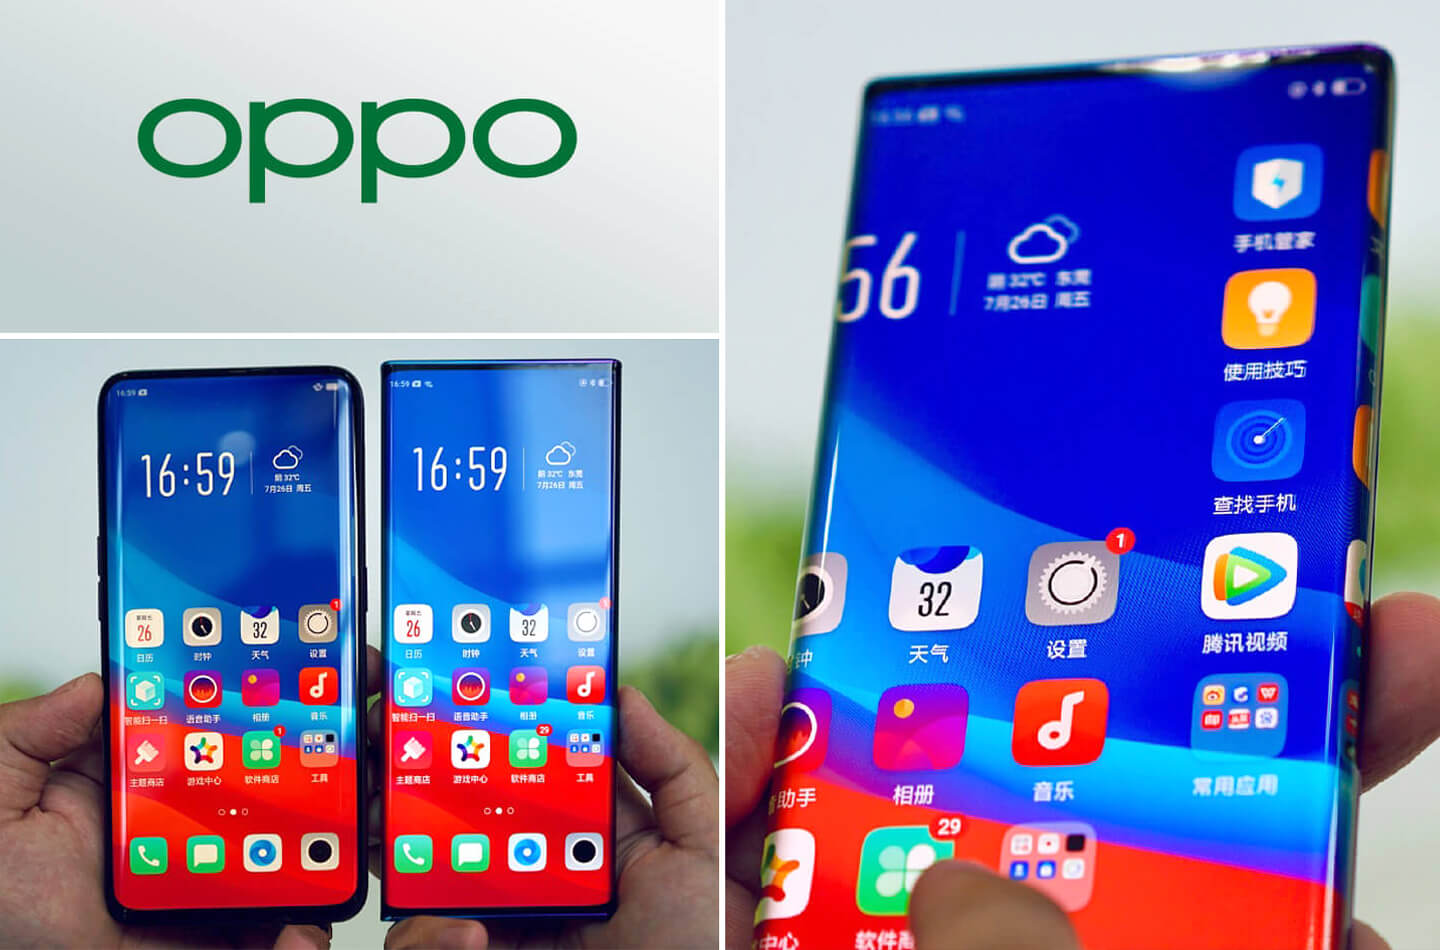 Oppo telefoon curved display